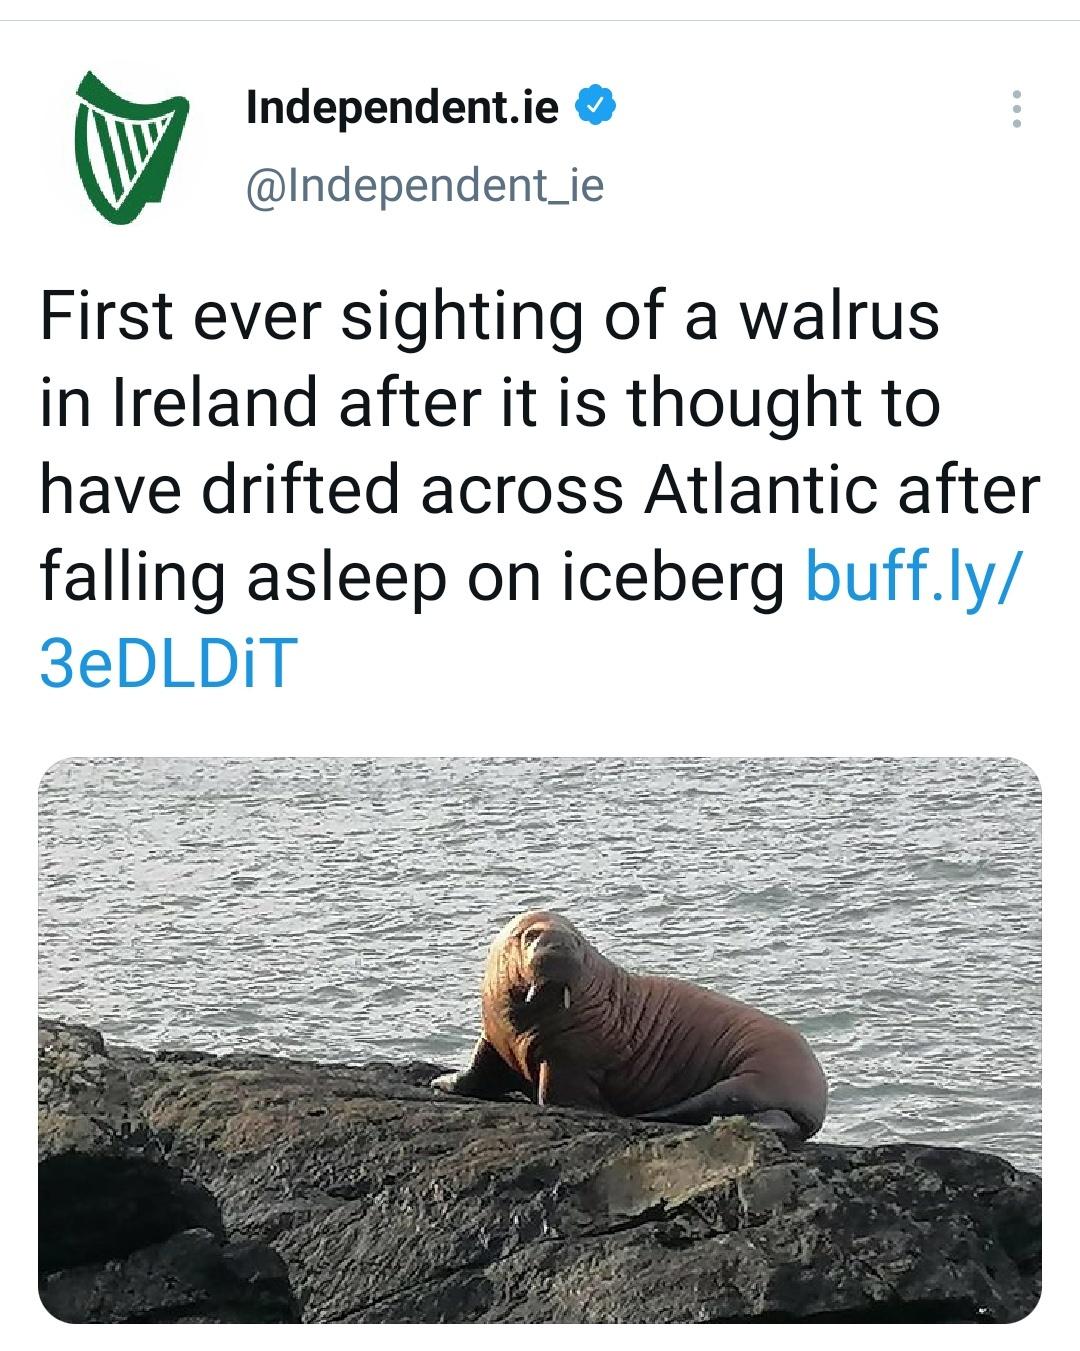 funny memes and random pics - fauna - Independent.ie First ever sighting of a walrus in Ireland after it is thought to have drifted across Atlantic after falling asleep on iceberg buff.ly 3eDLDIT